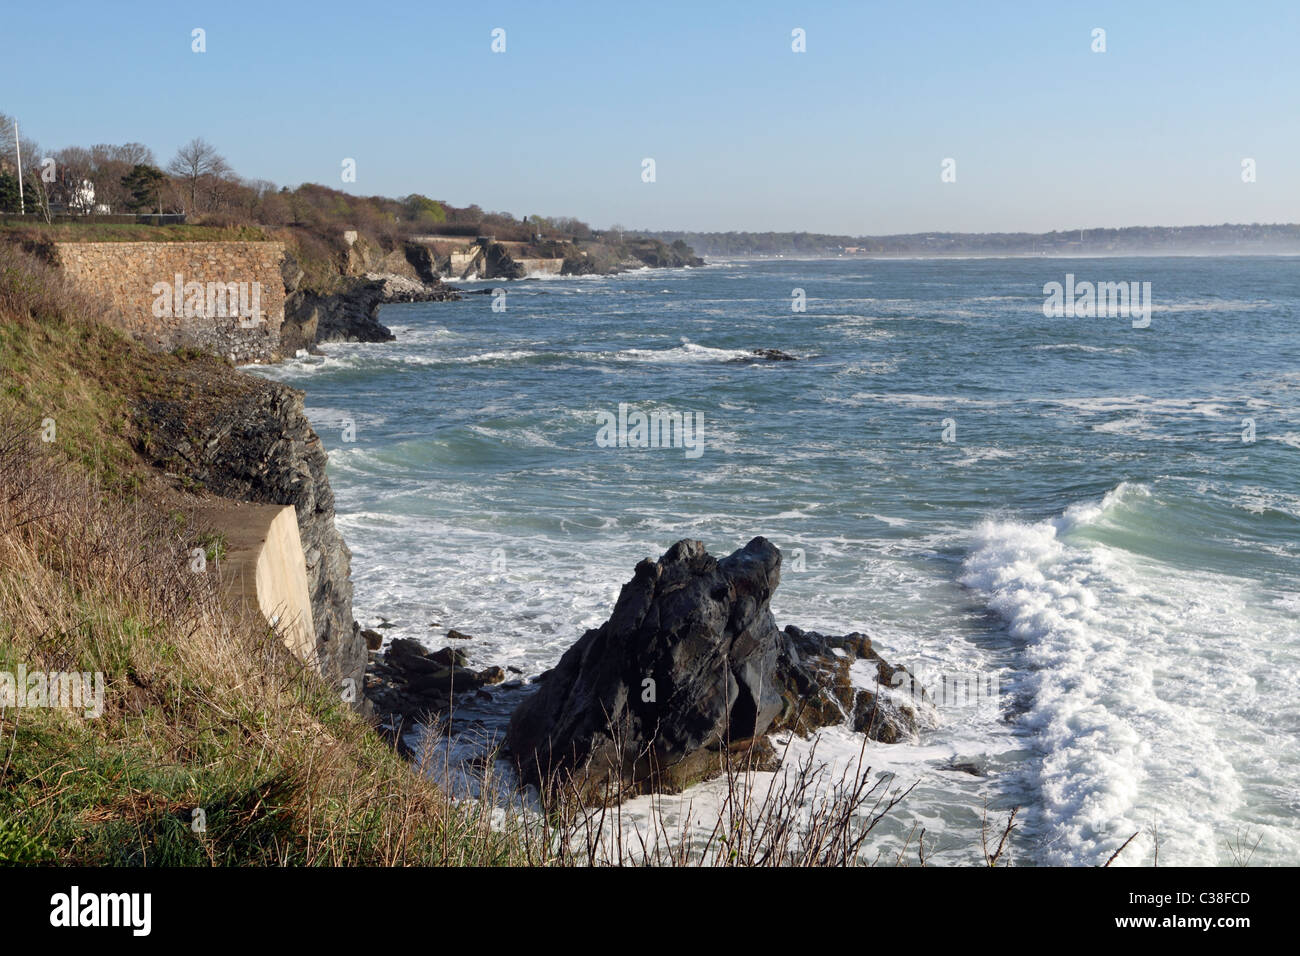 The Cliff Walk in Newport, Rhode Island, USA, affords a three and one-half mile walk at the edge of seaside bluffs. Stock Photo